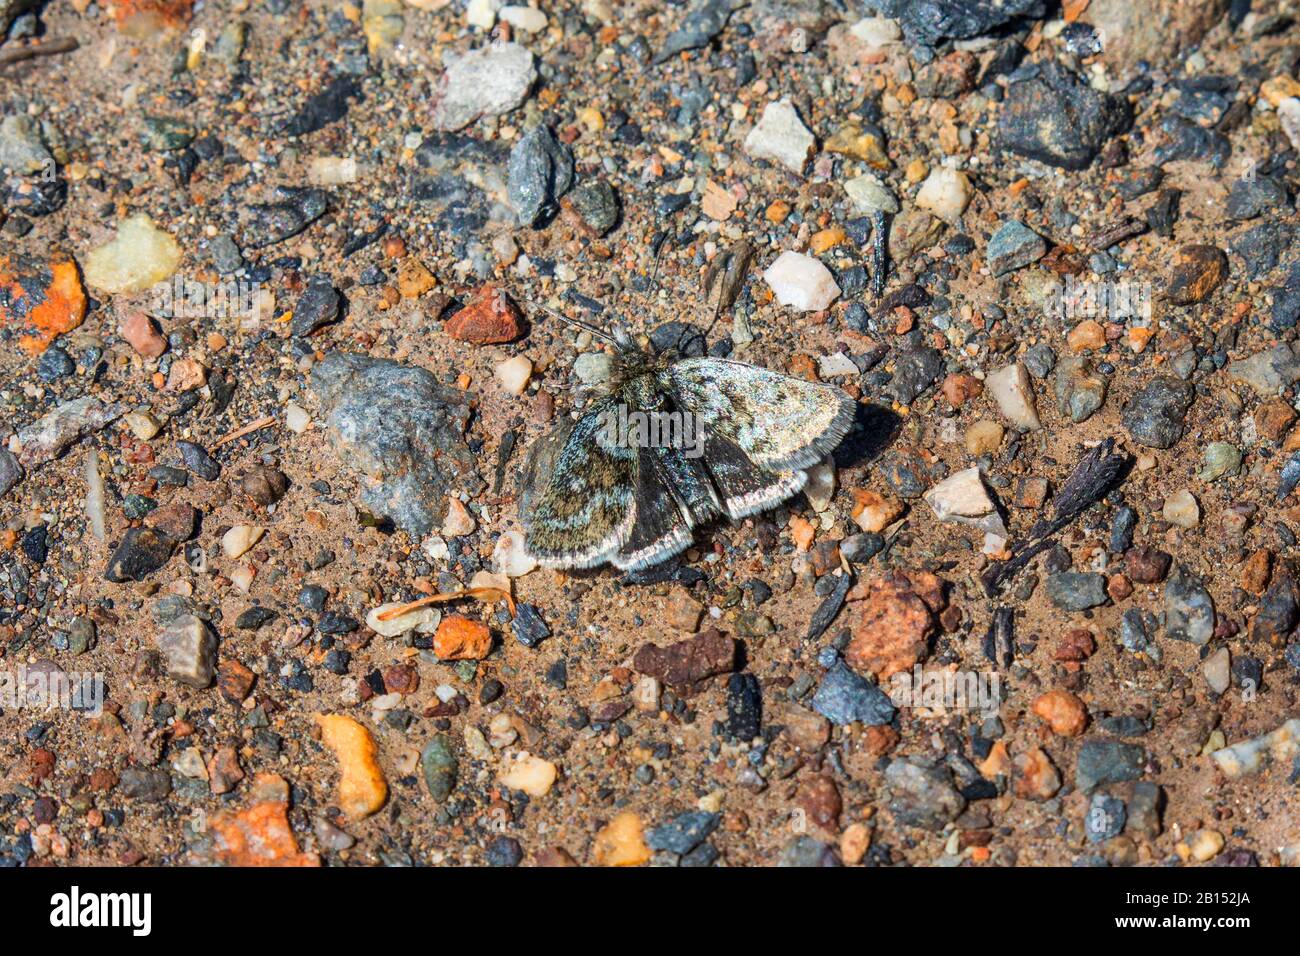 pyralid moth (Metaxmeste phrygialis), on gravel, view from above, Austria, Tyrol Stock Photo